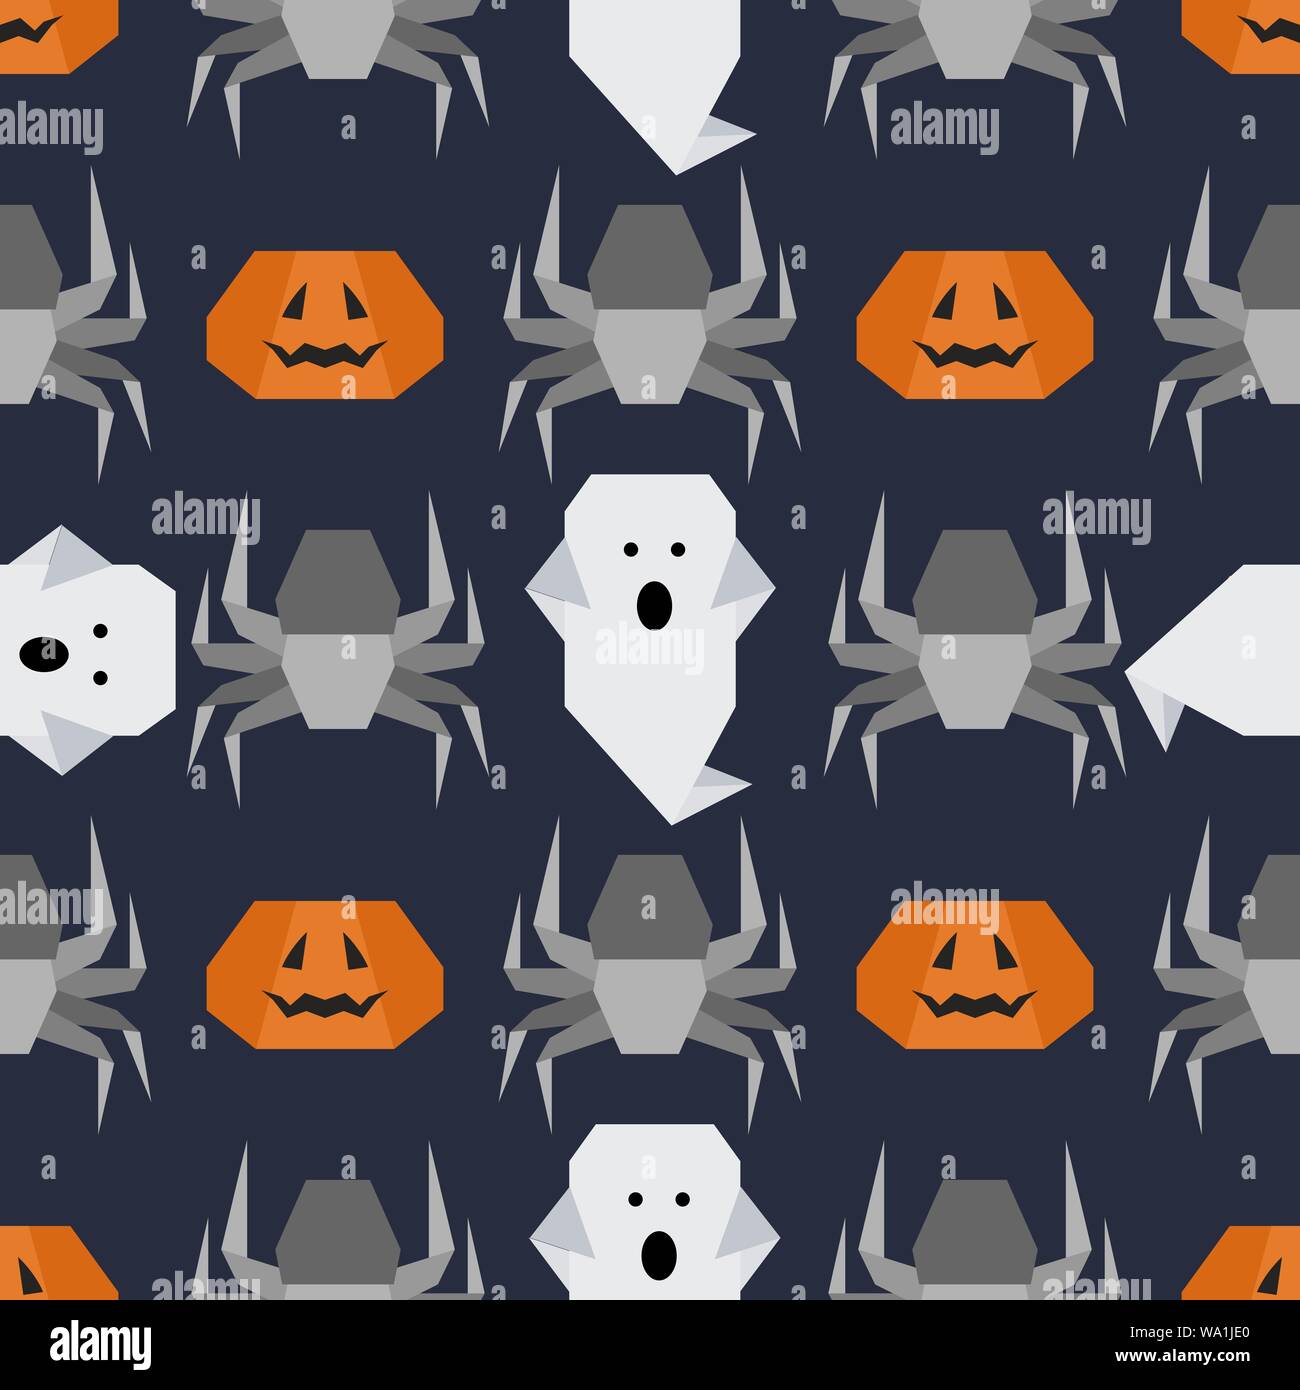 halloween fabric 2020 Halloween 2020 Vector Seamless Pattern With Origami Spider Ghost Pumpkin Design For Party Card Wrapping Fabric Print Stock Vector Image Art Alamy halloween fabric 2020